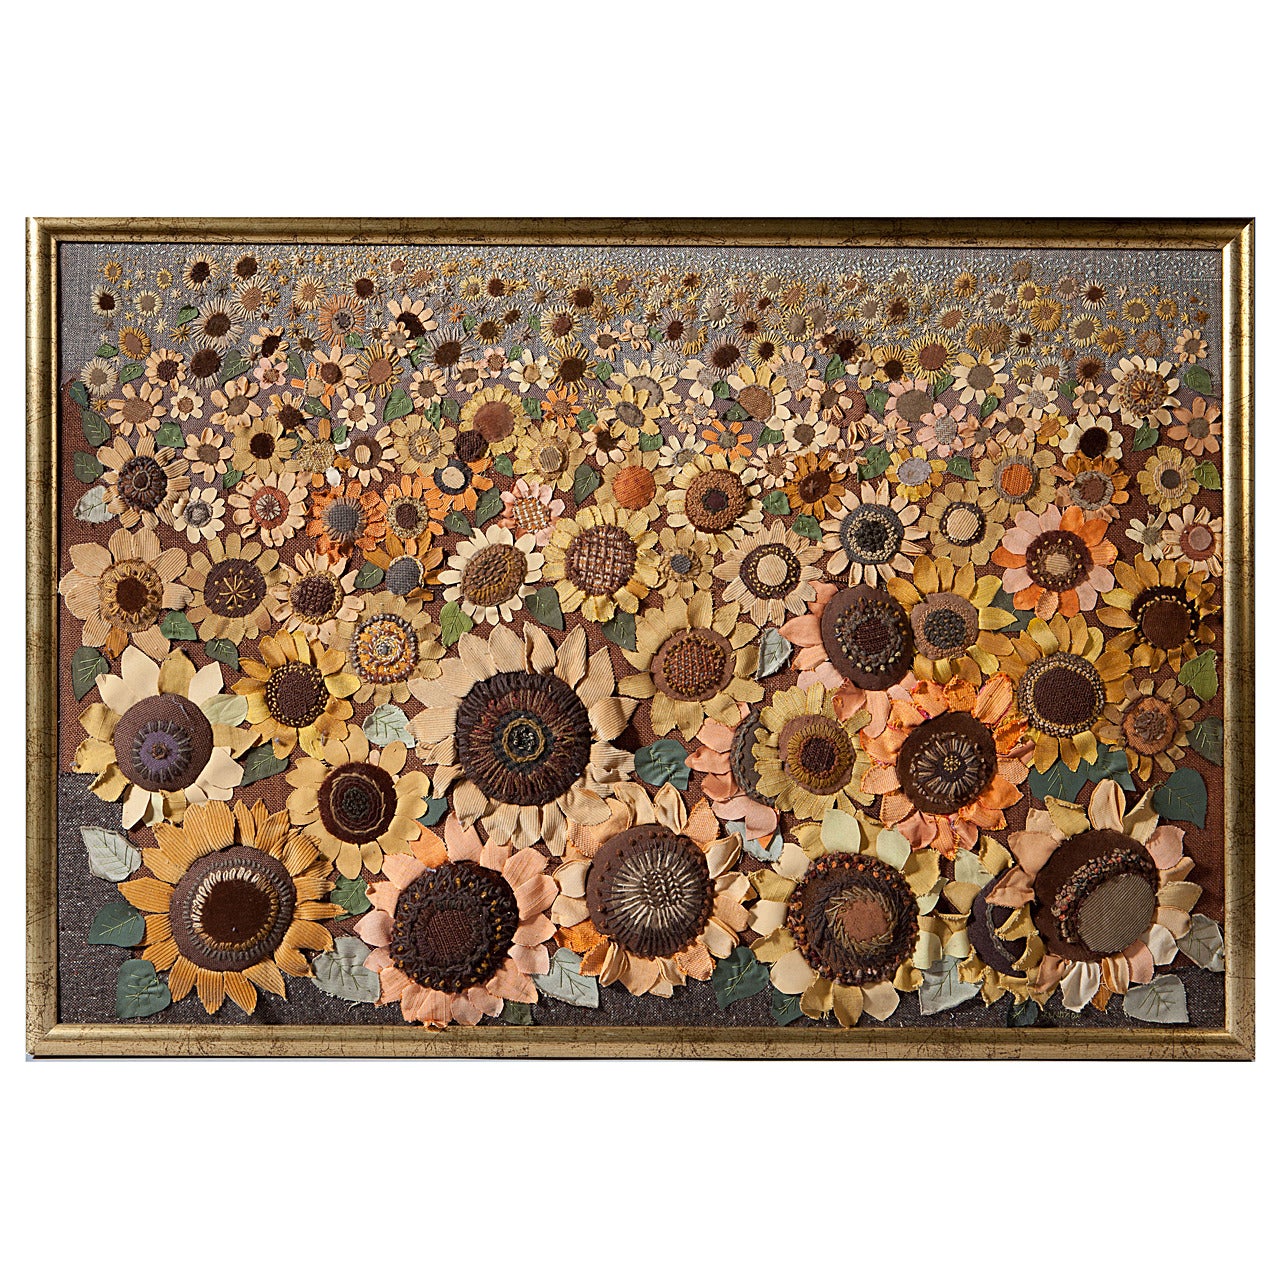 Hand Made Fabric Collage of a Sunflower Field